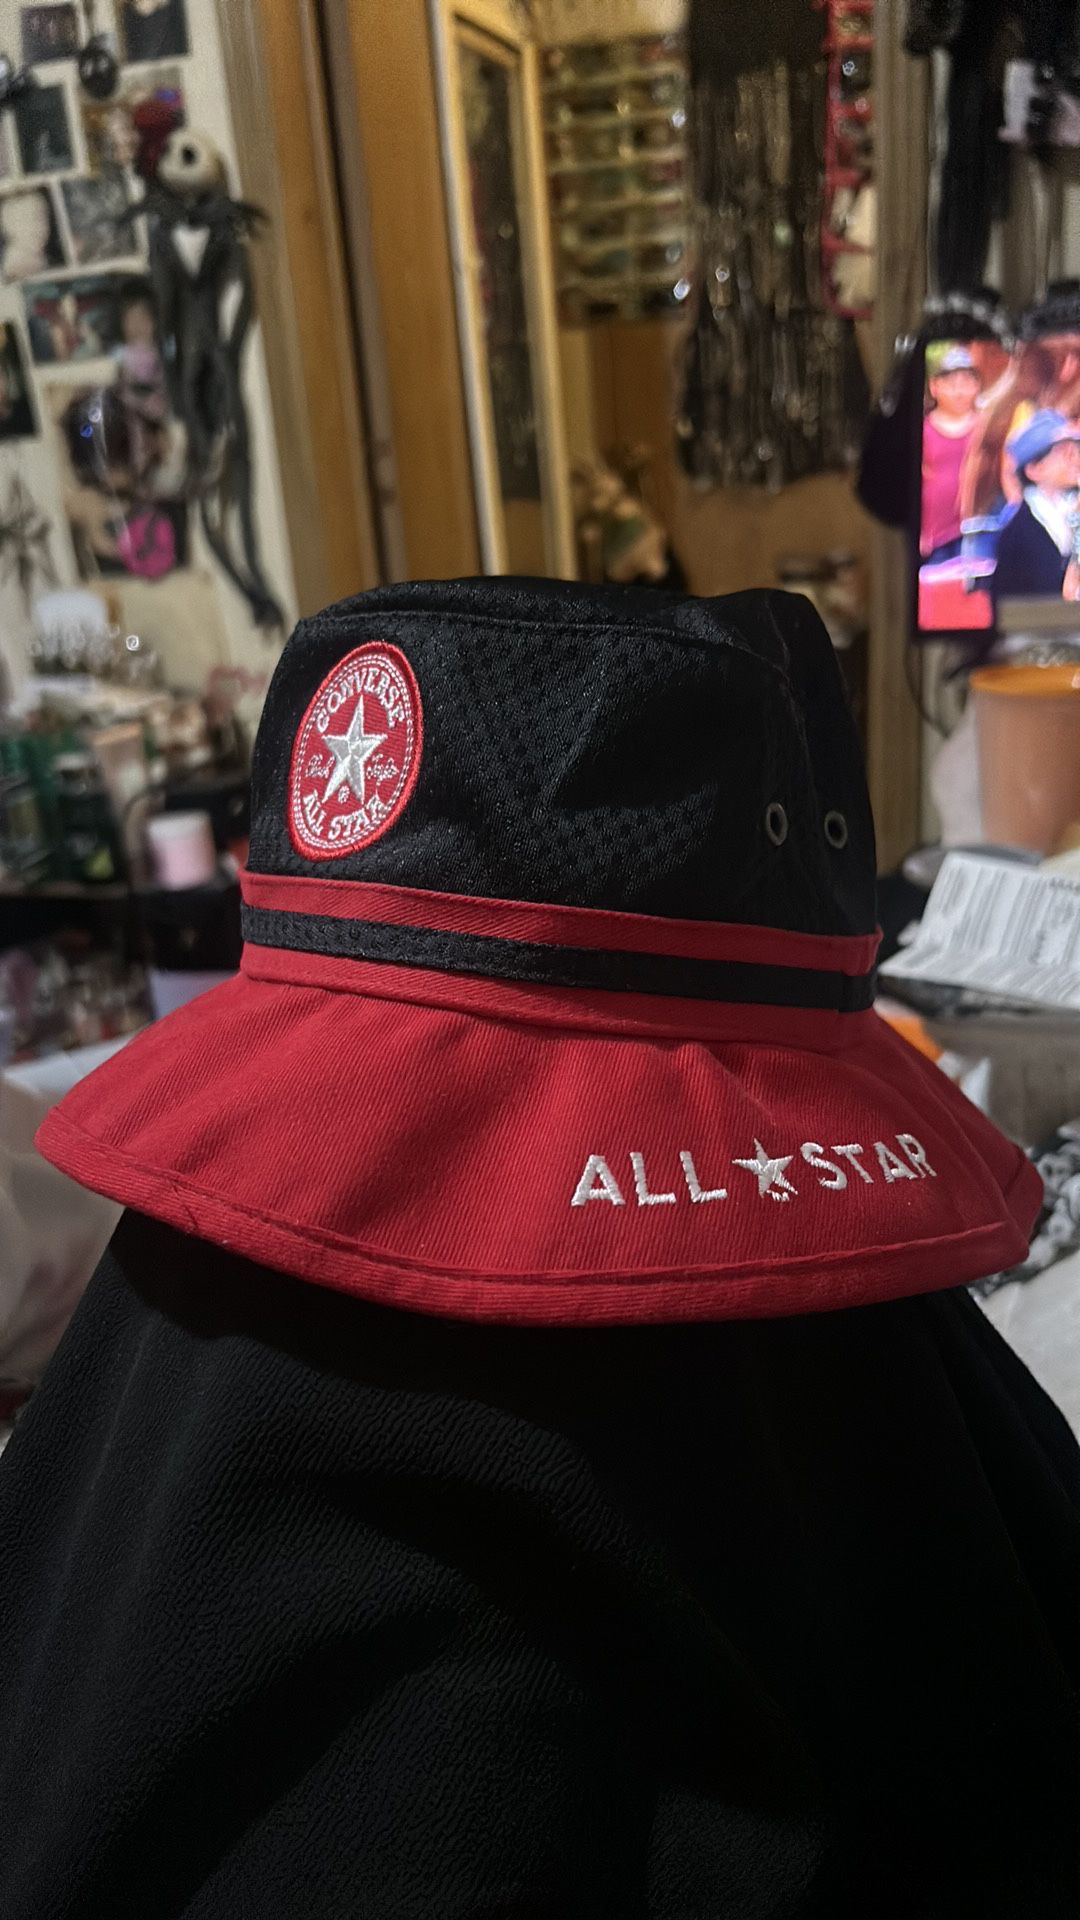 Converse All Star Bucket Hat (Very Rare Find)